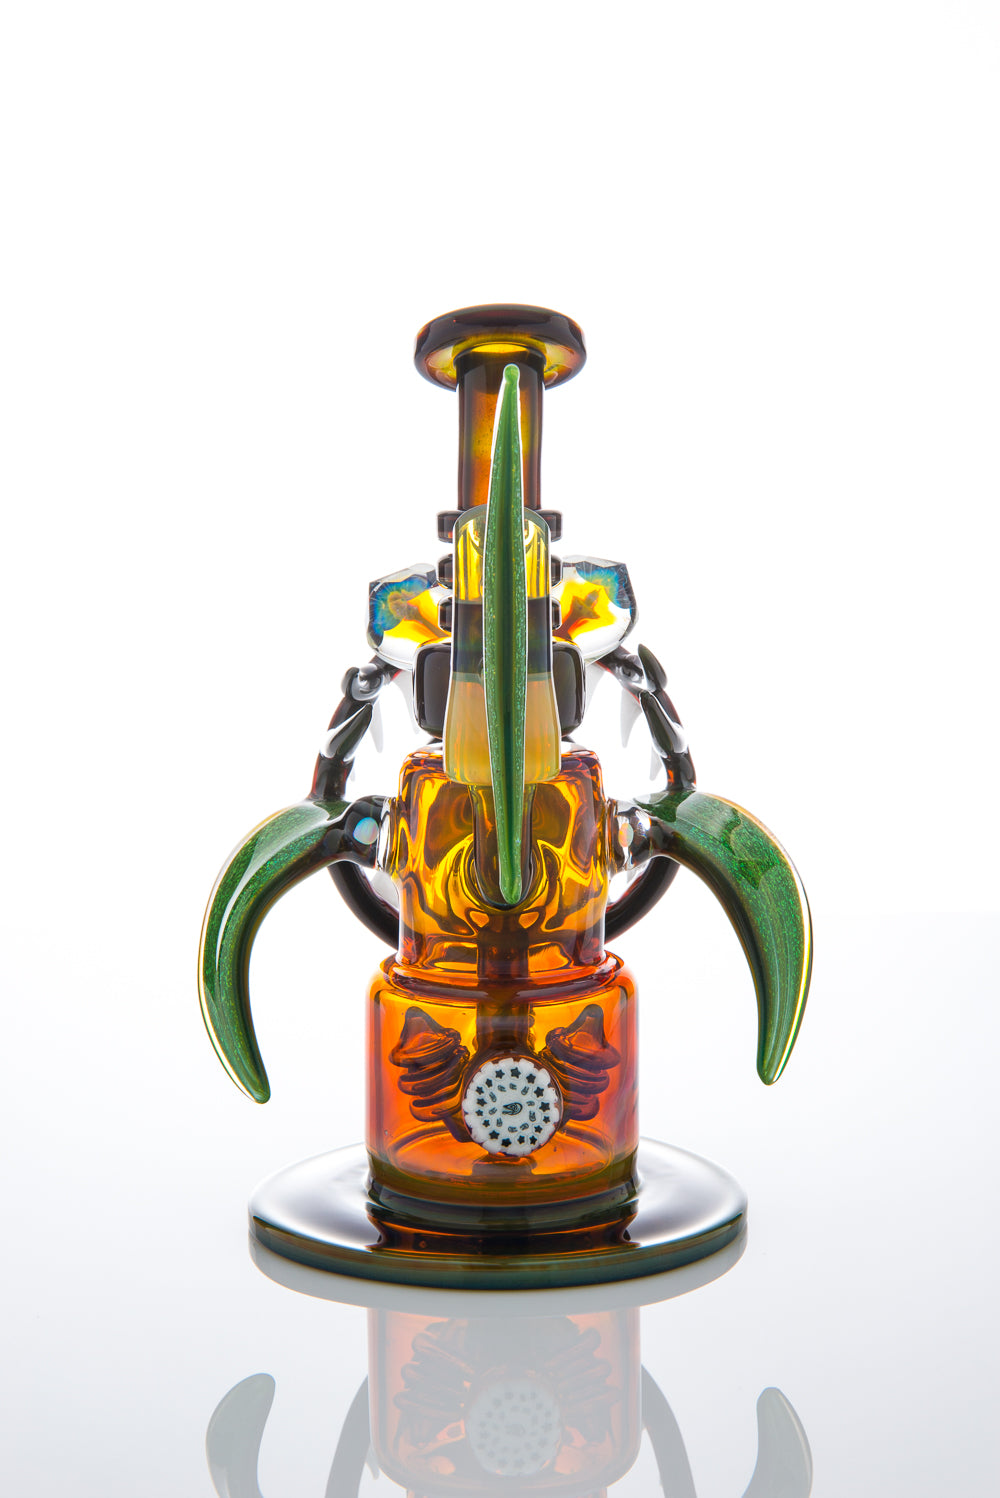 Ill Glass Alien Tech Fish Flux Cycler Collaboration with Jason Lee, Buck, Darby, and Adam G.